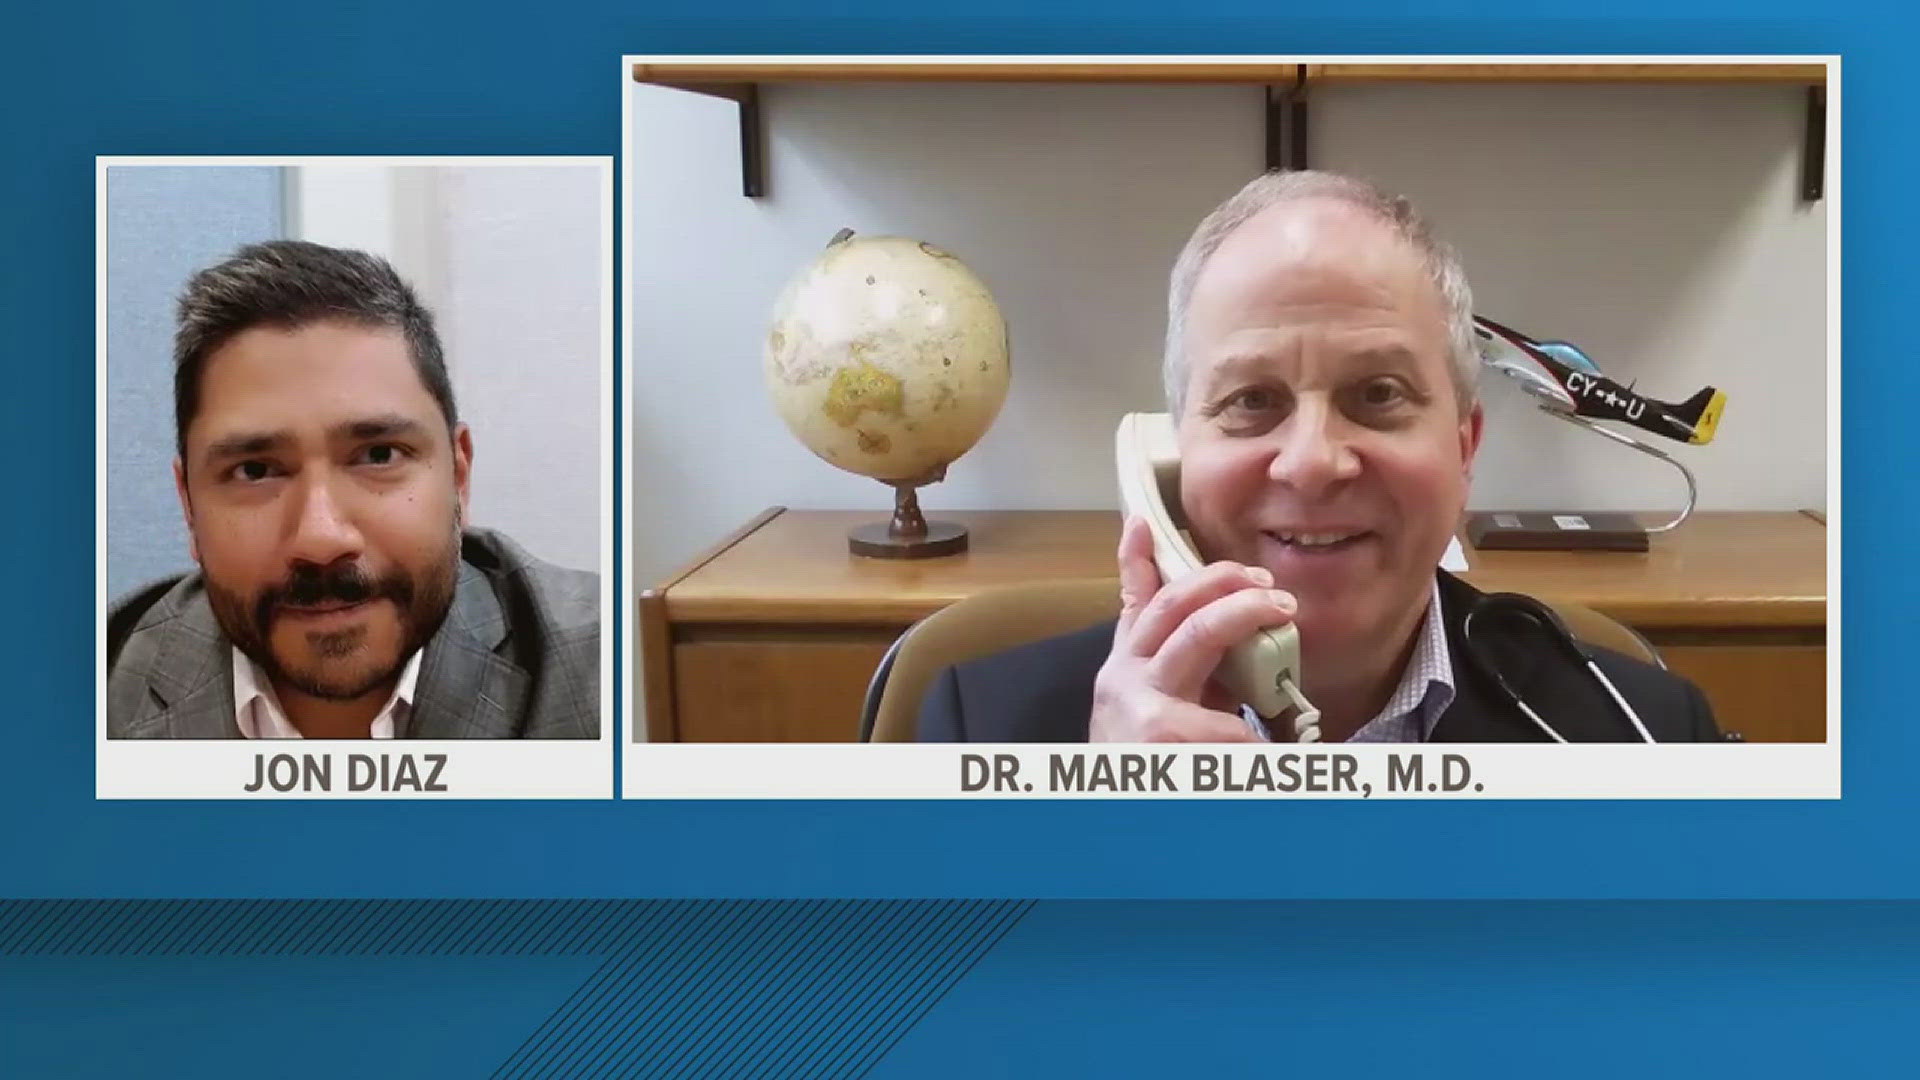 Dr. Mark Blaser was on This Week with Jon Diaz to talk more about what we've already seen this year for allergies and what people can expect as the year moves on.